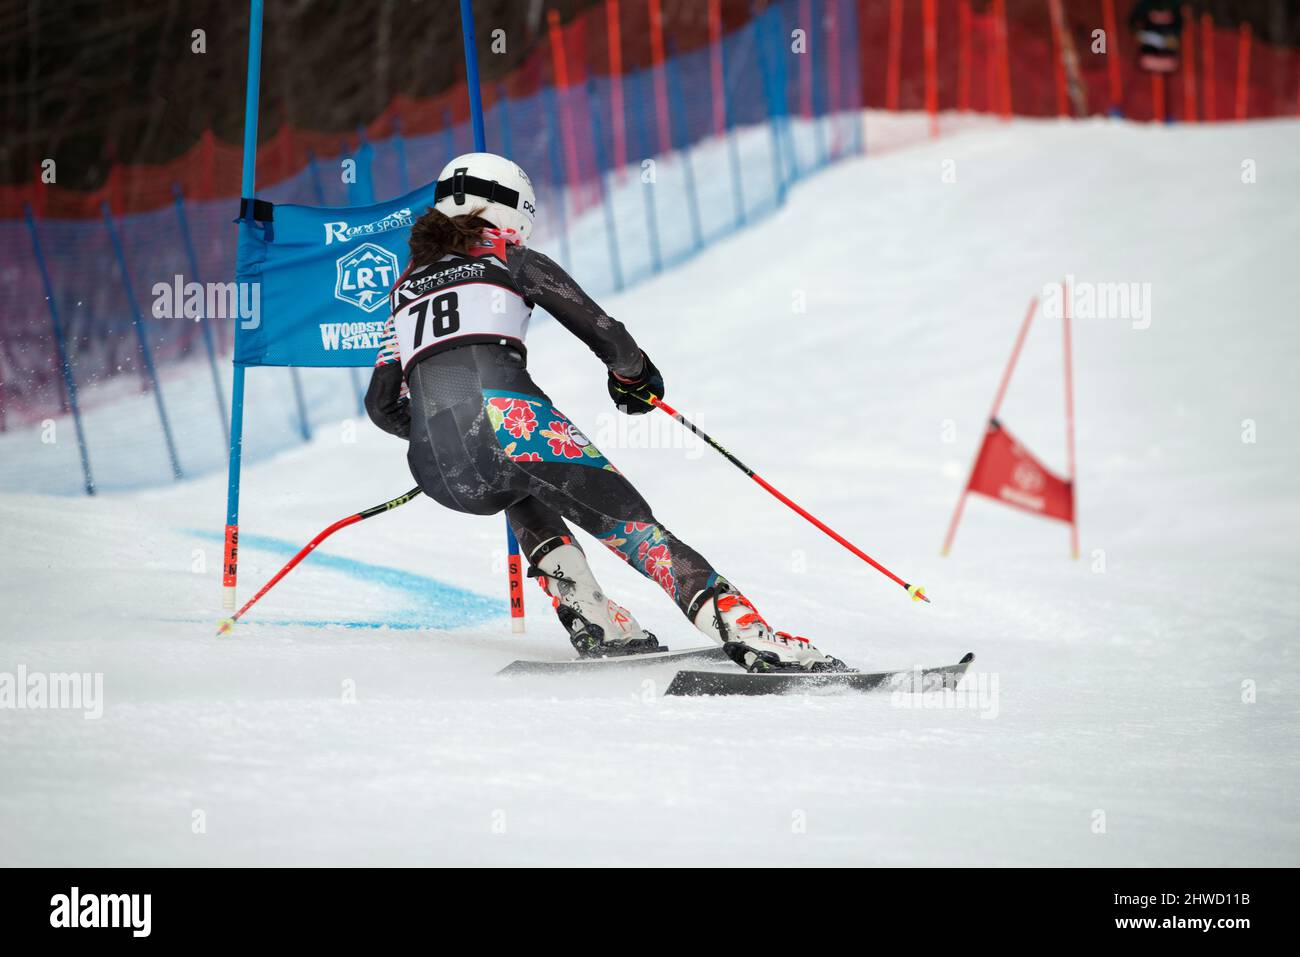 Female ski racer on the Giant Slalom course during the 2022 Lafoley New Hampshire Alpine Racing Association (NHARA) State Championship at Loon Mountain, NH. Stock Photo